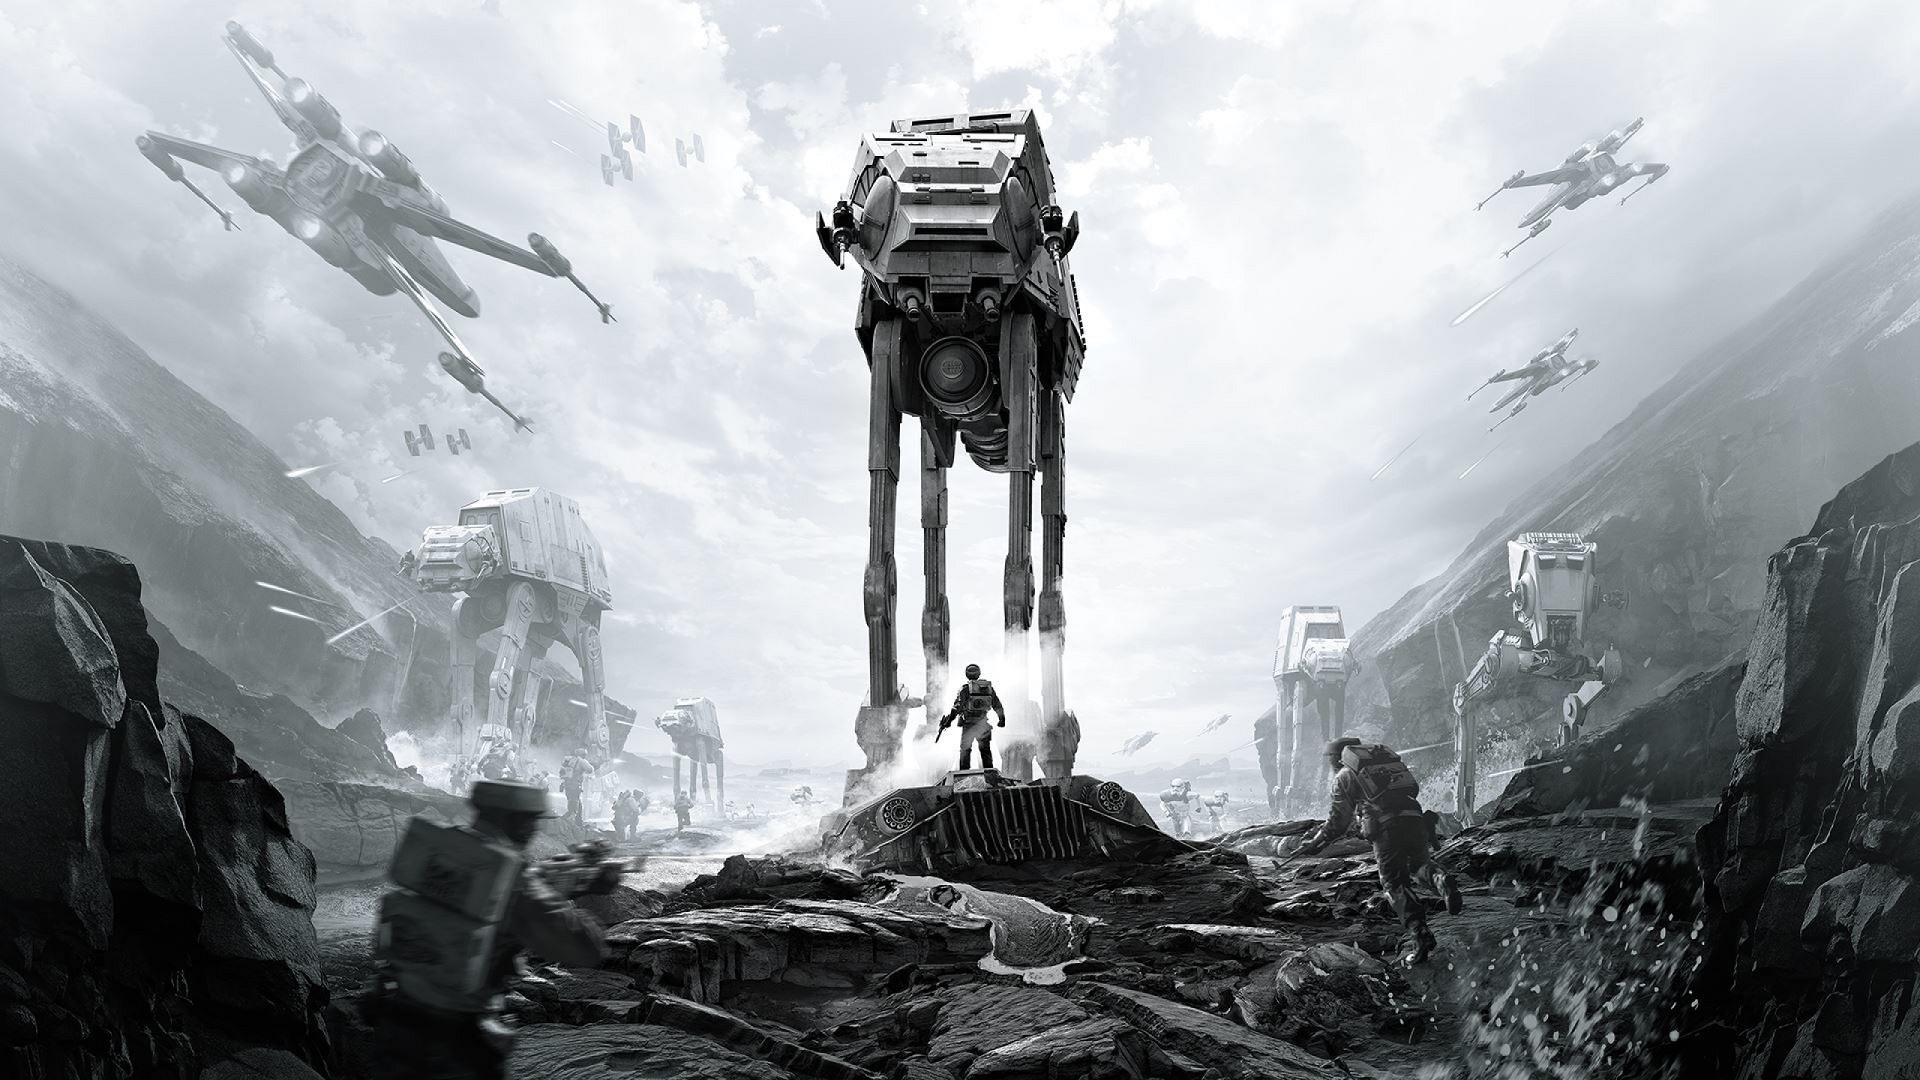 General 1920x1080 Star Wars: Battlefront Star Wars video games science fiction AT-AT X-wing